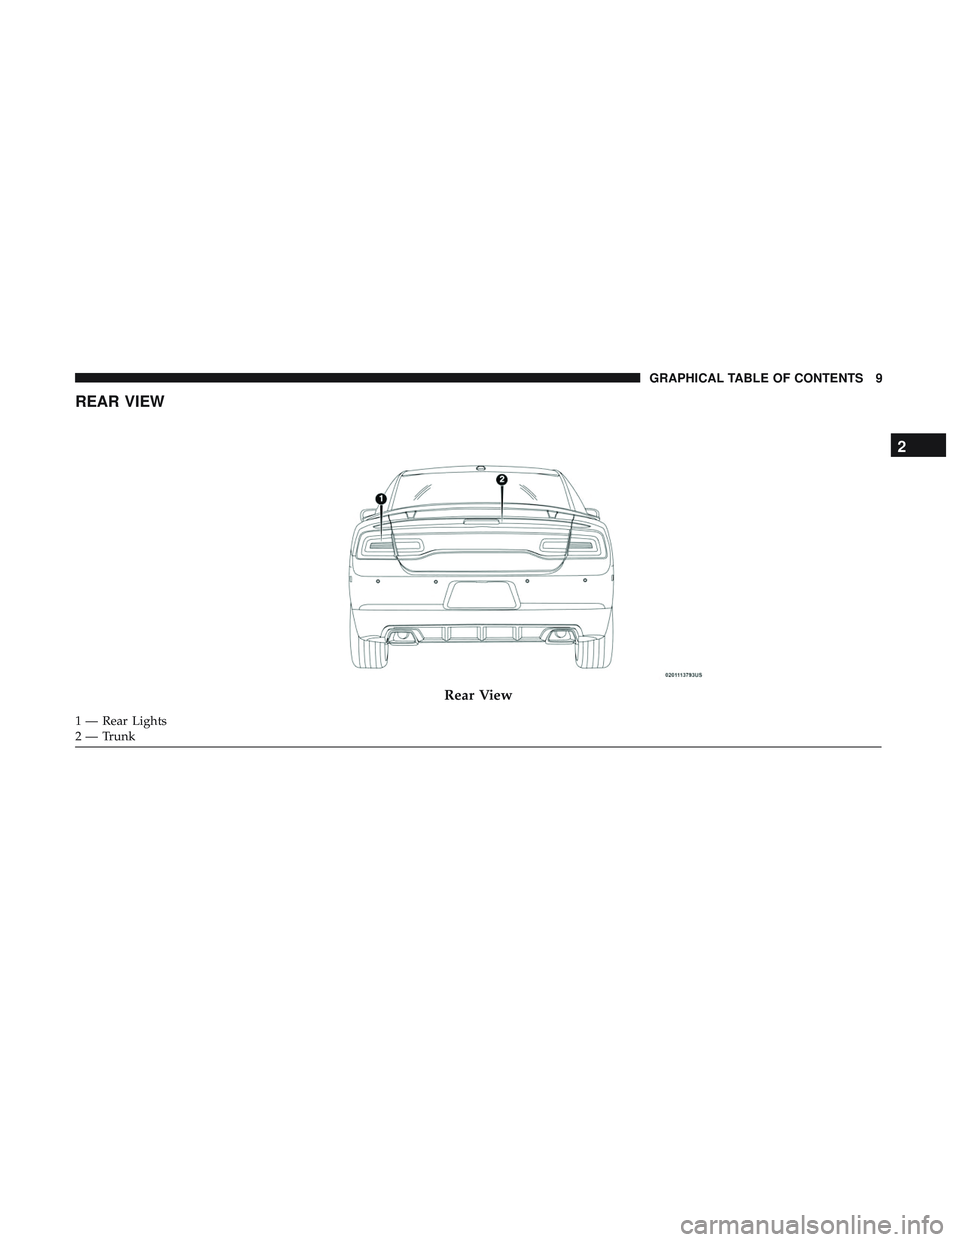 DODGE CHARGER SRT 2018  Owners Manual REAR VIEW
Rear View
1 — Rear Lights
2 — Trunk
2
GRAPHICAL TABLE OF CONTENTS 9 